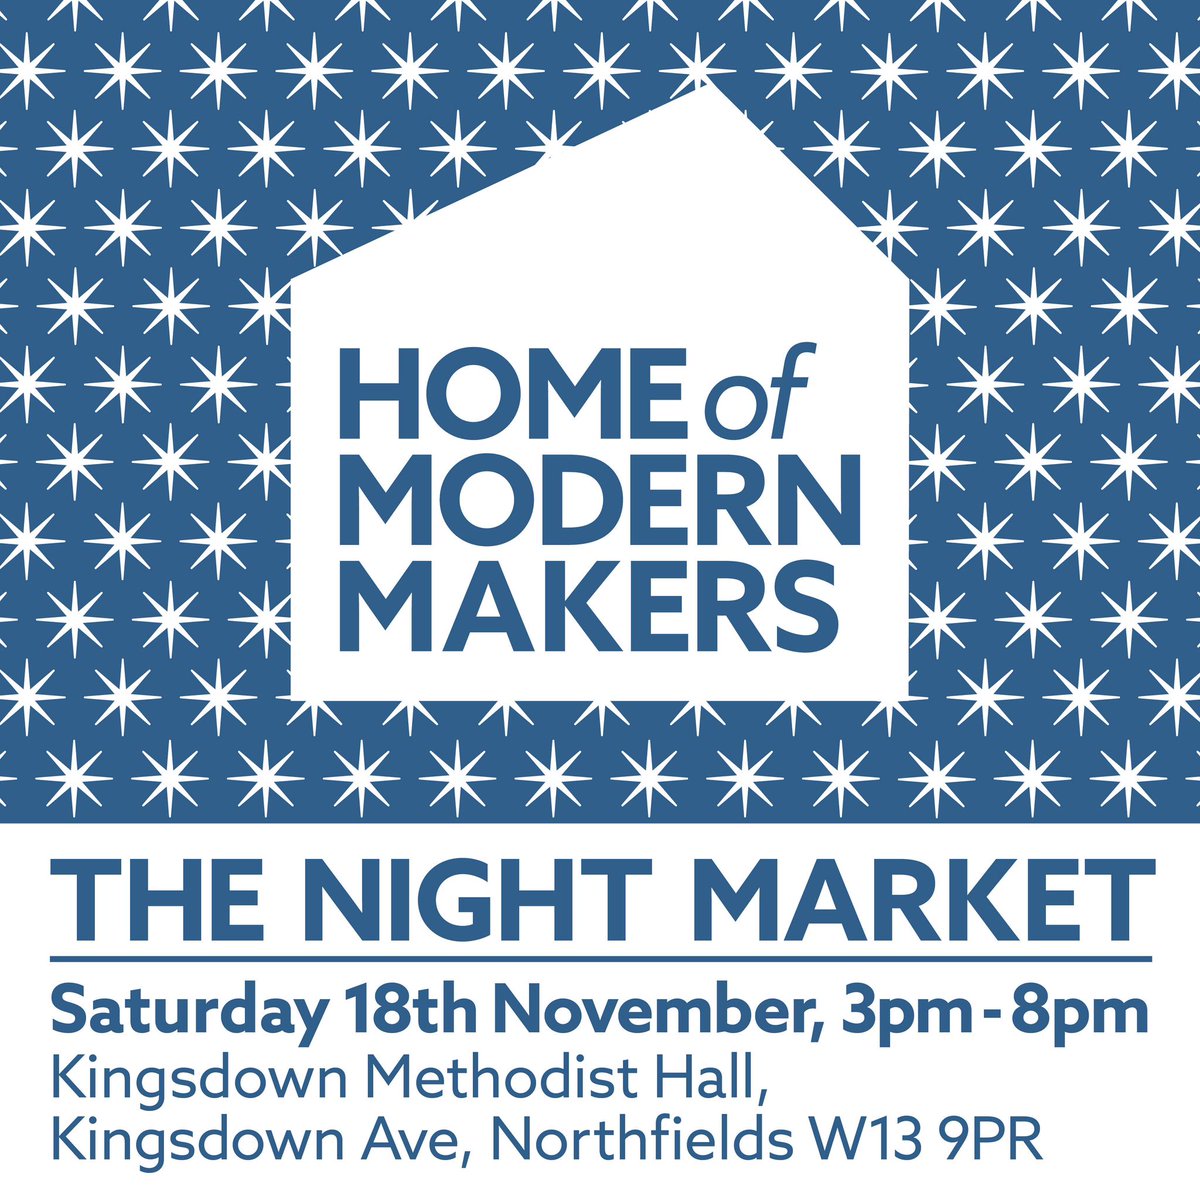 I can't believe it's less than 2 weeks away... the #Northfields Night Market from #homeofmodernmakers. Lots of brilliant gift ideas from local makers in a relaxed shopping environment - perfect! #Ealing #Hanwell #christmasgifts #handmadegifts #popupmarket #shoplocal #supportsmall